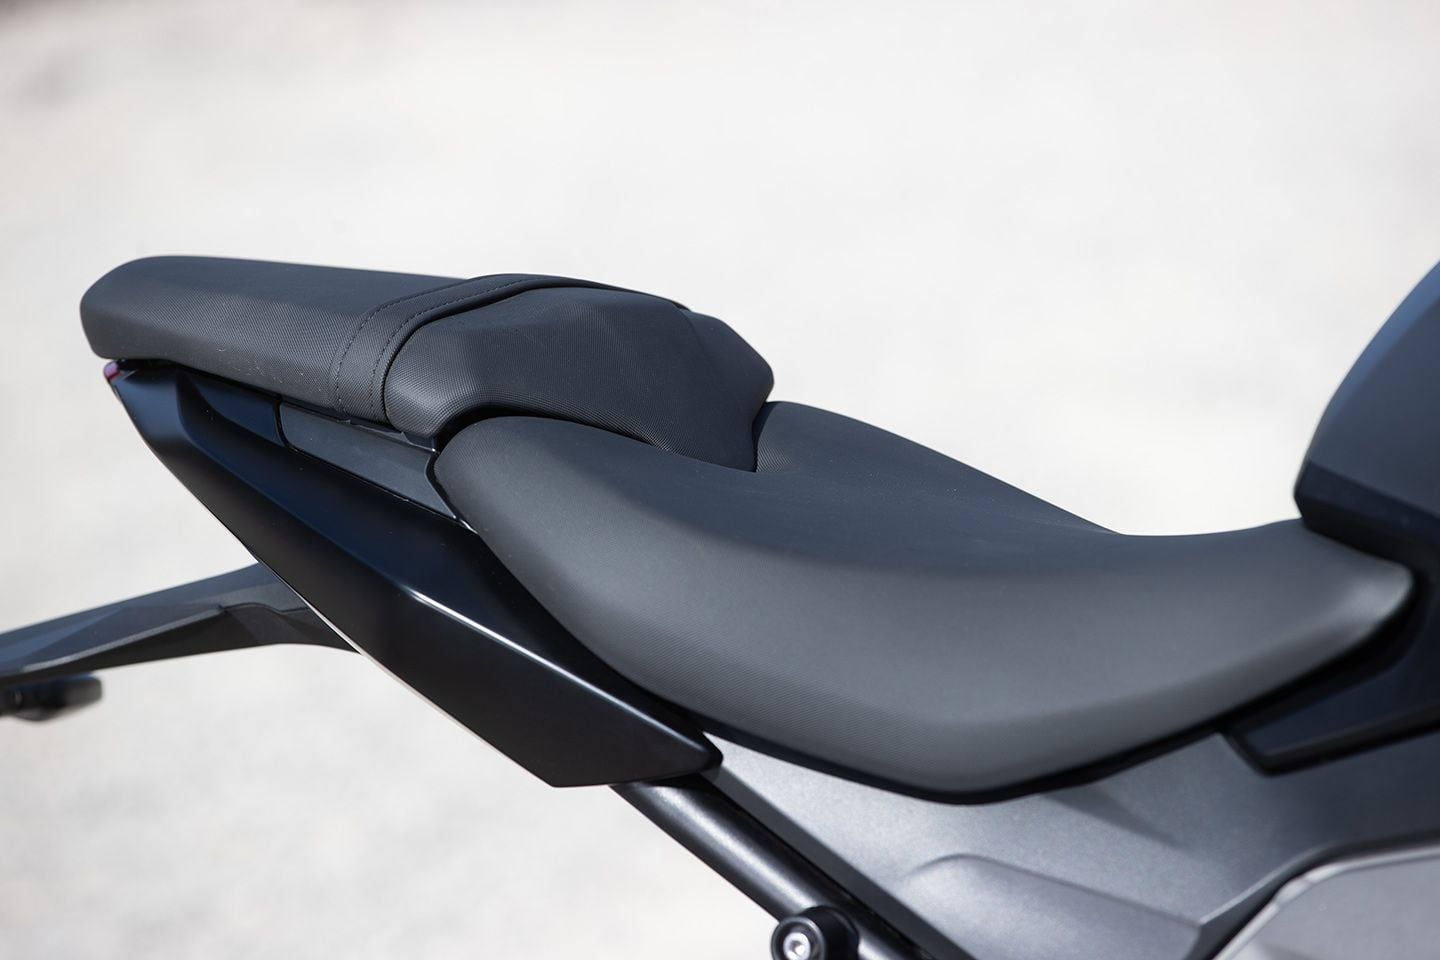 The standard seat is set at 31.9 inches and is quite comfortable to complement the roomy riding position.